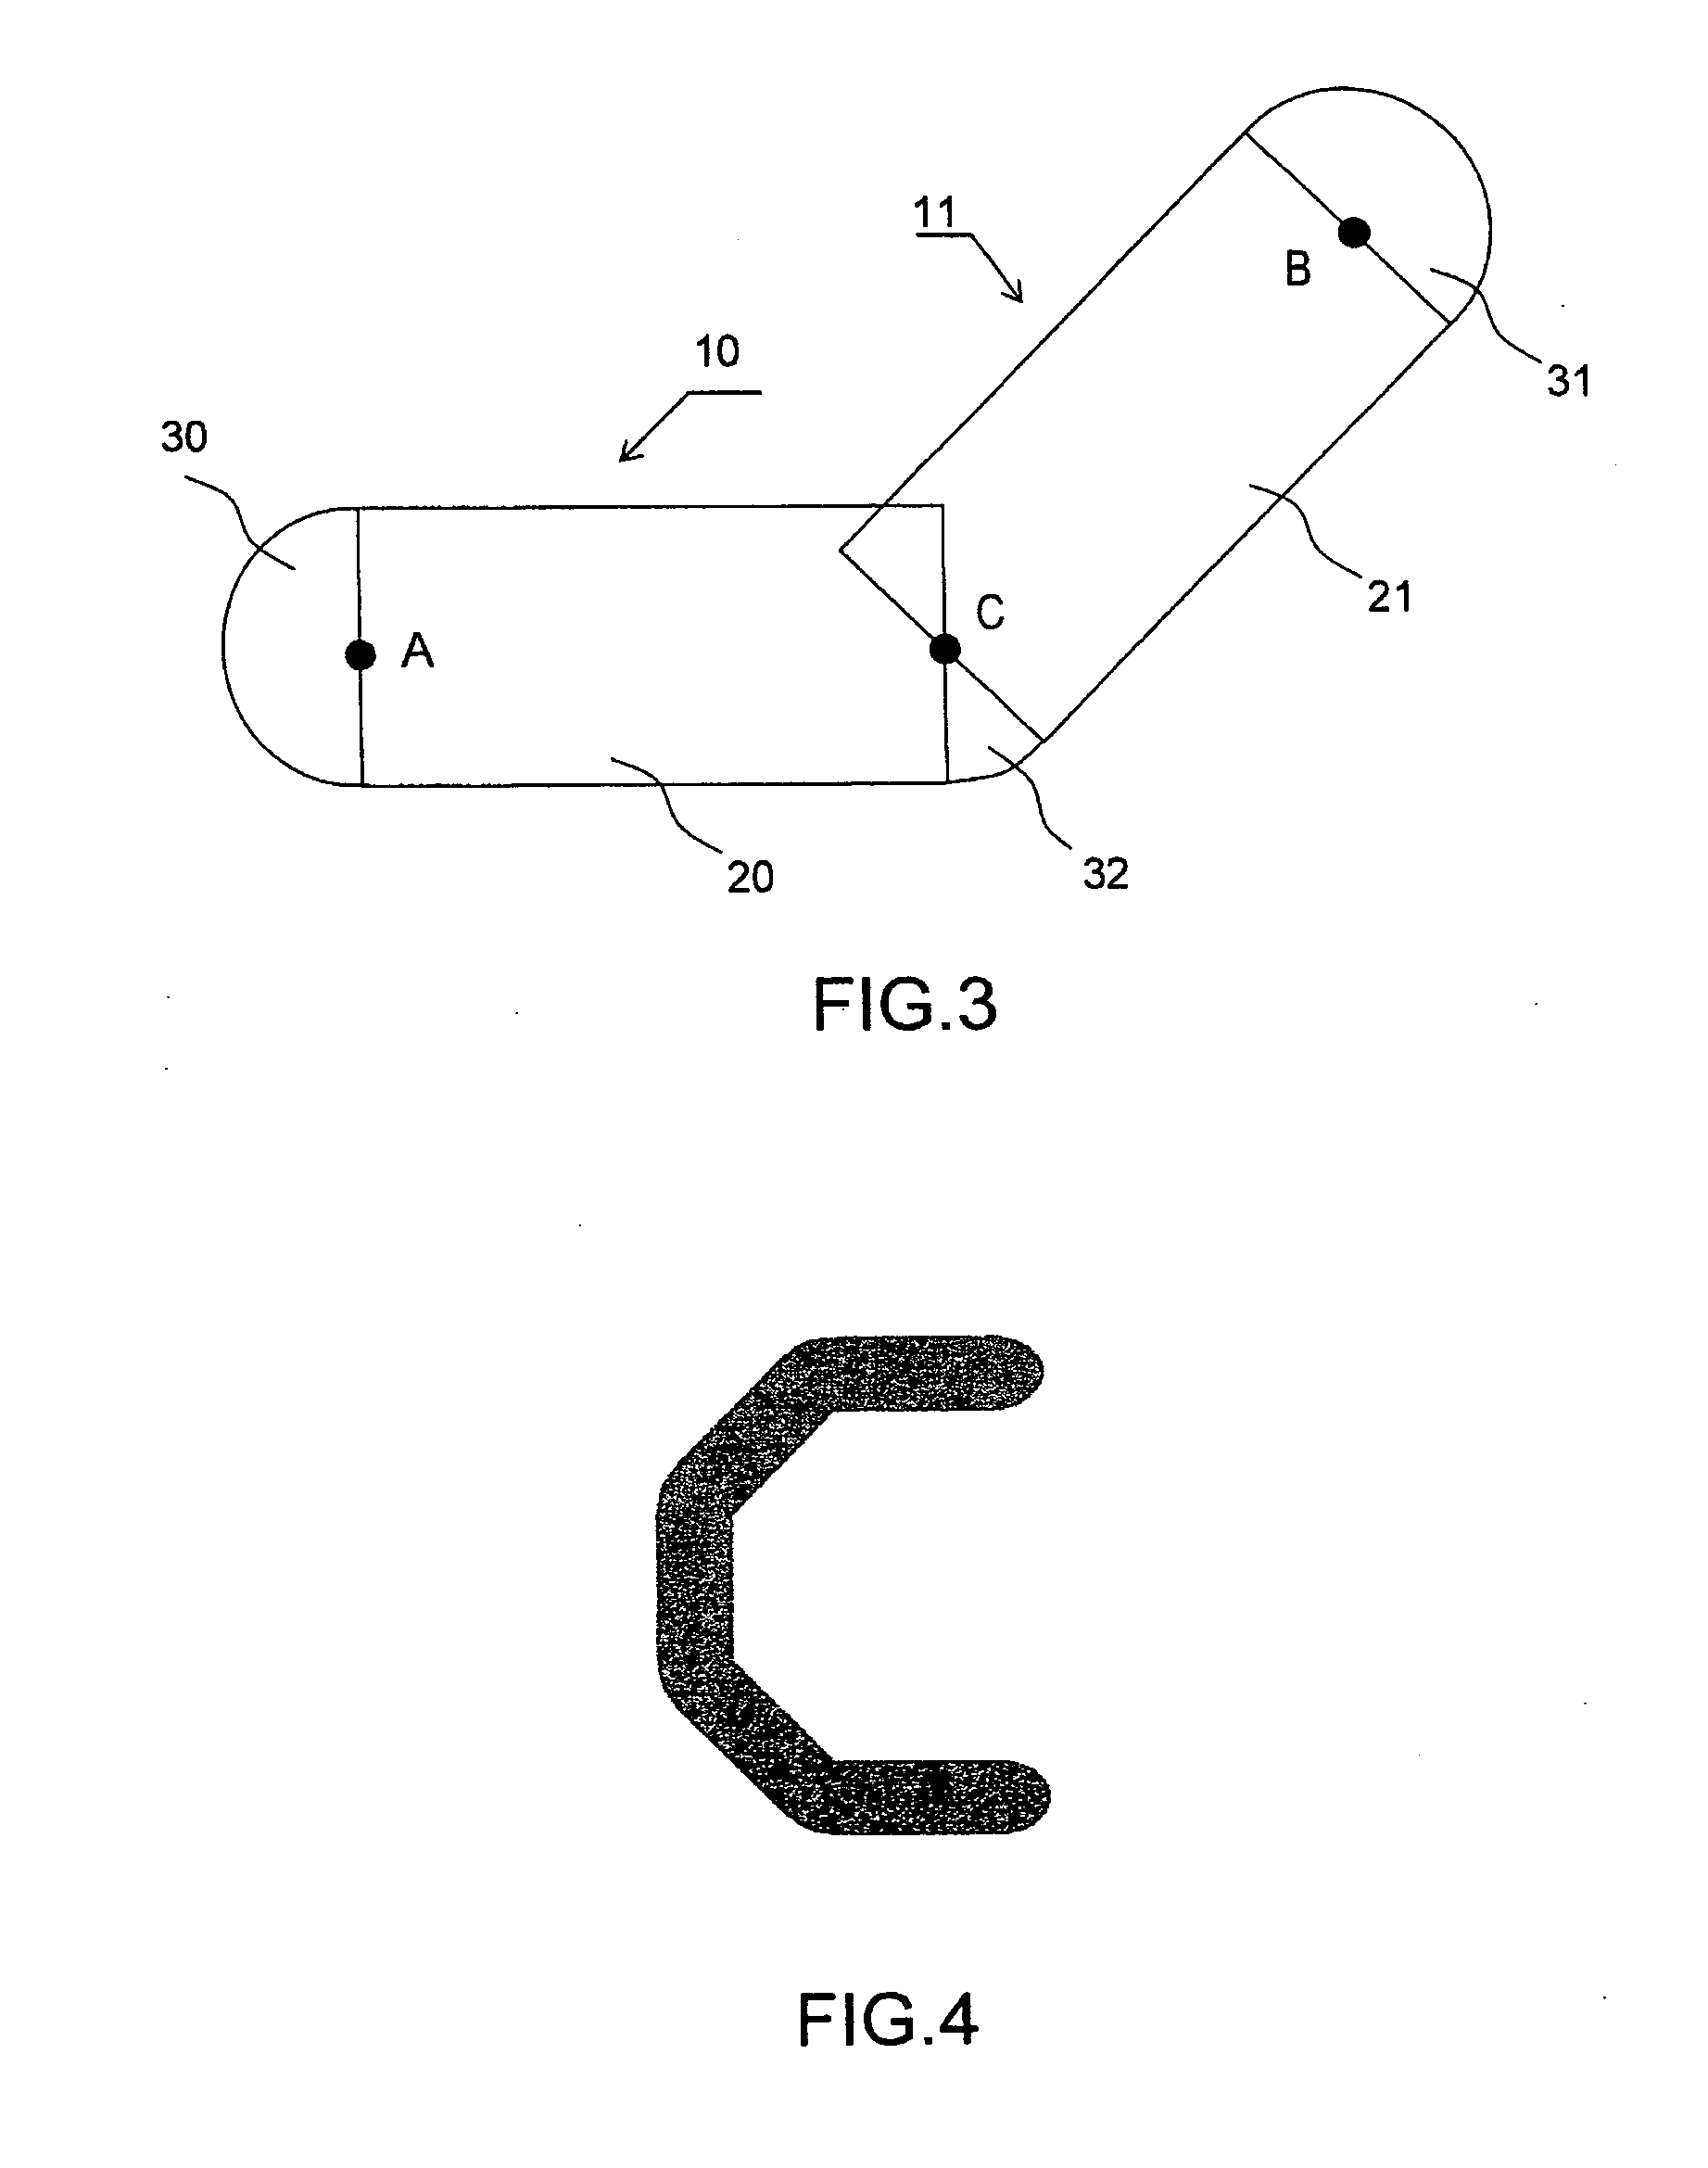 Method for Graphically Generating Rounded-End Lines